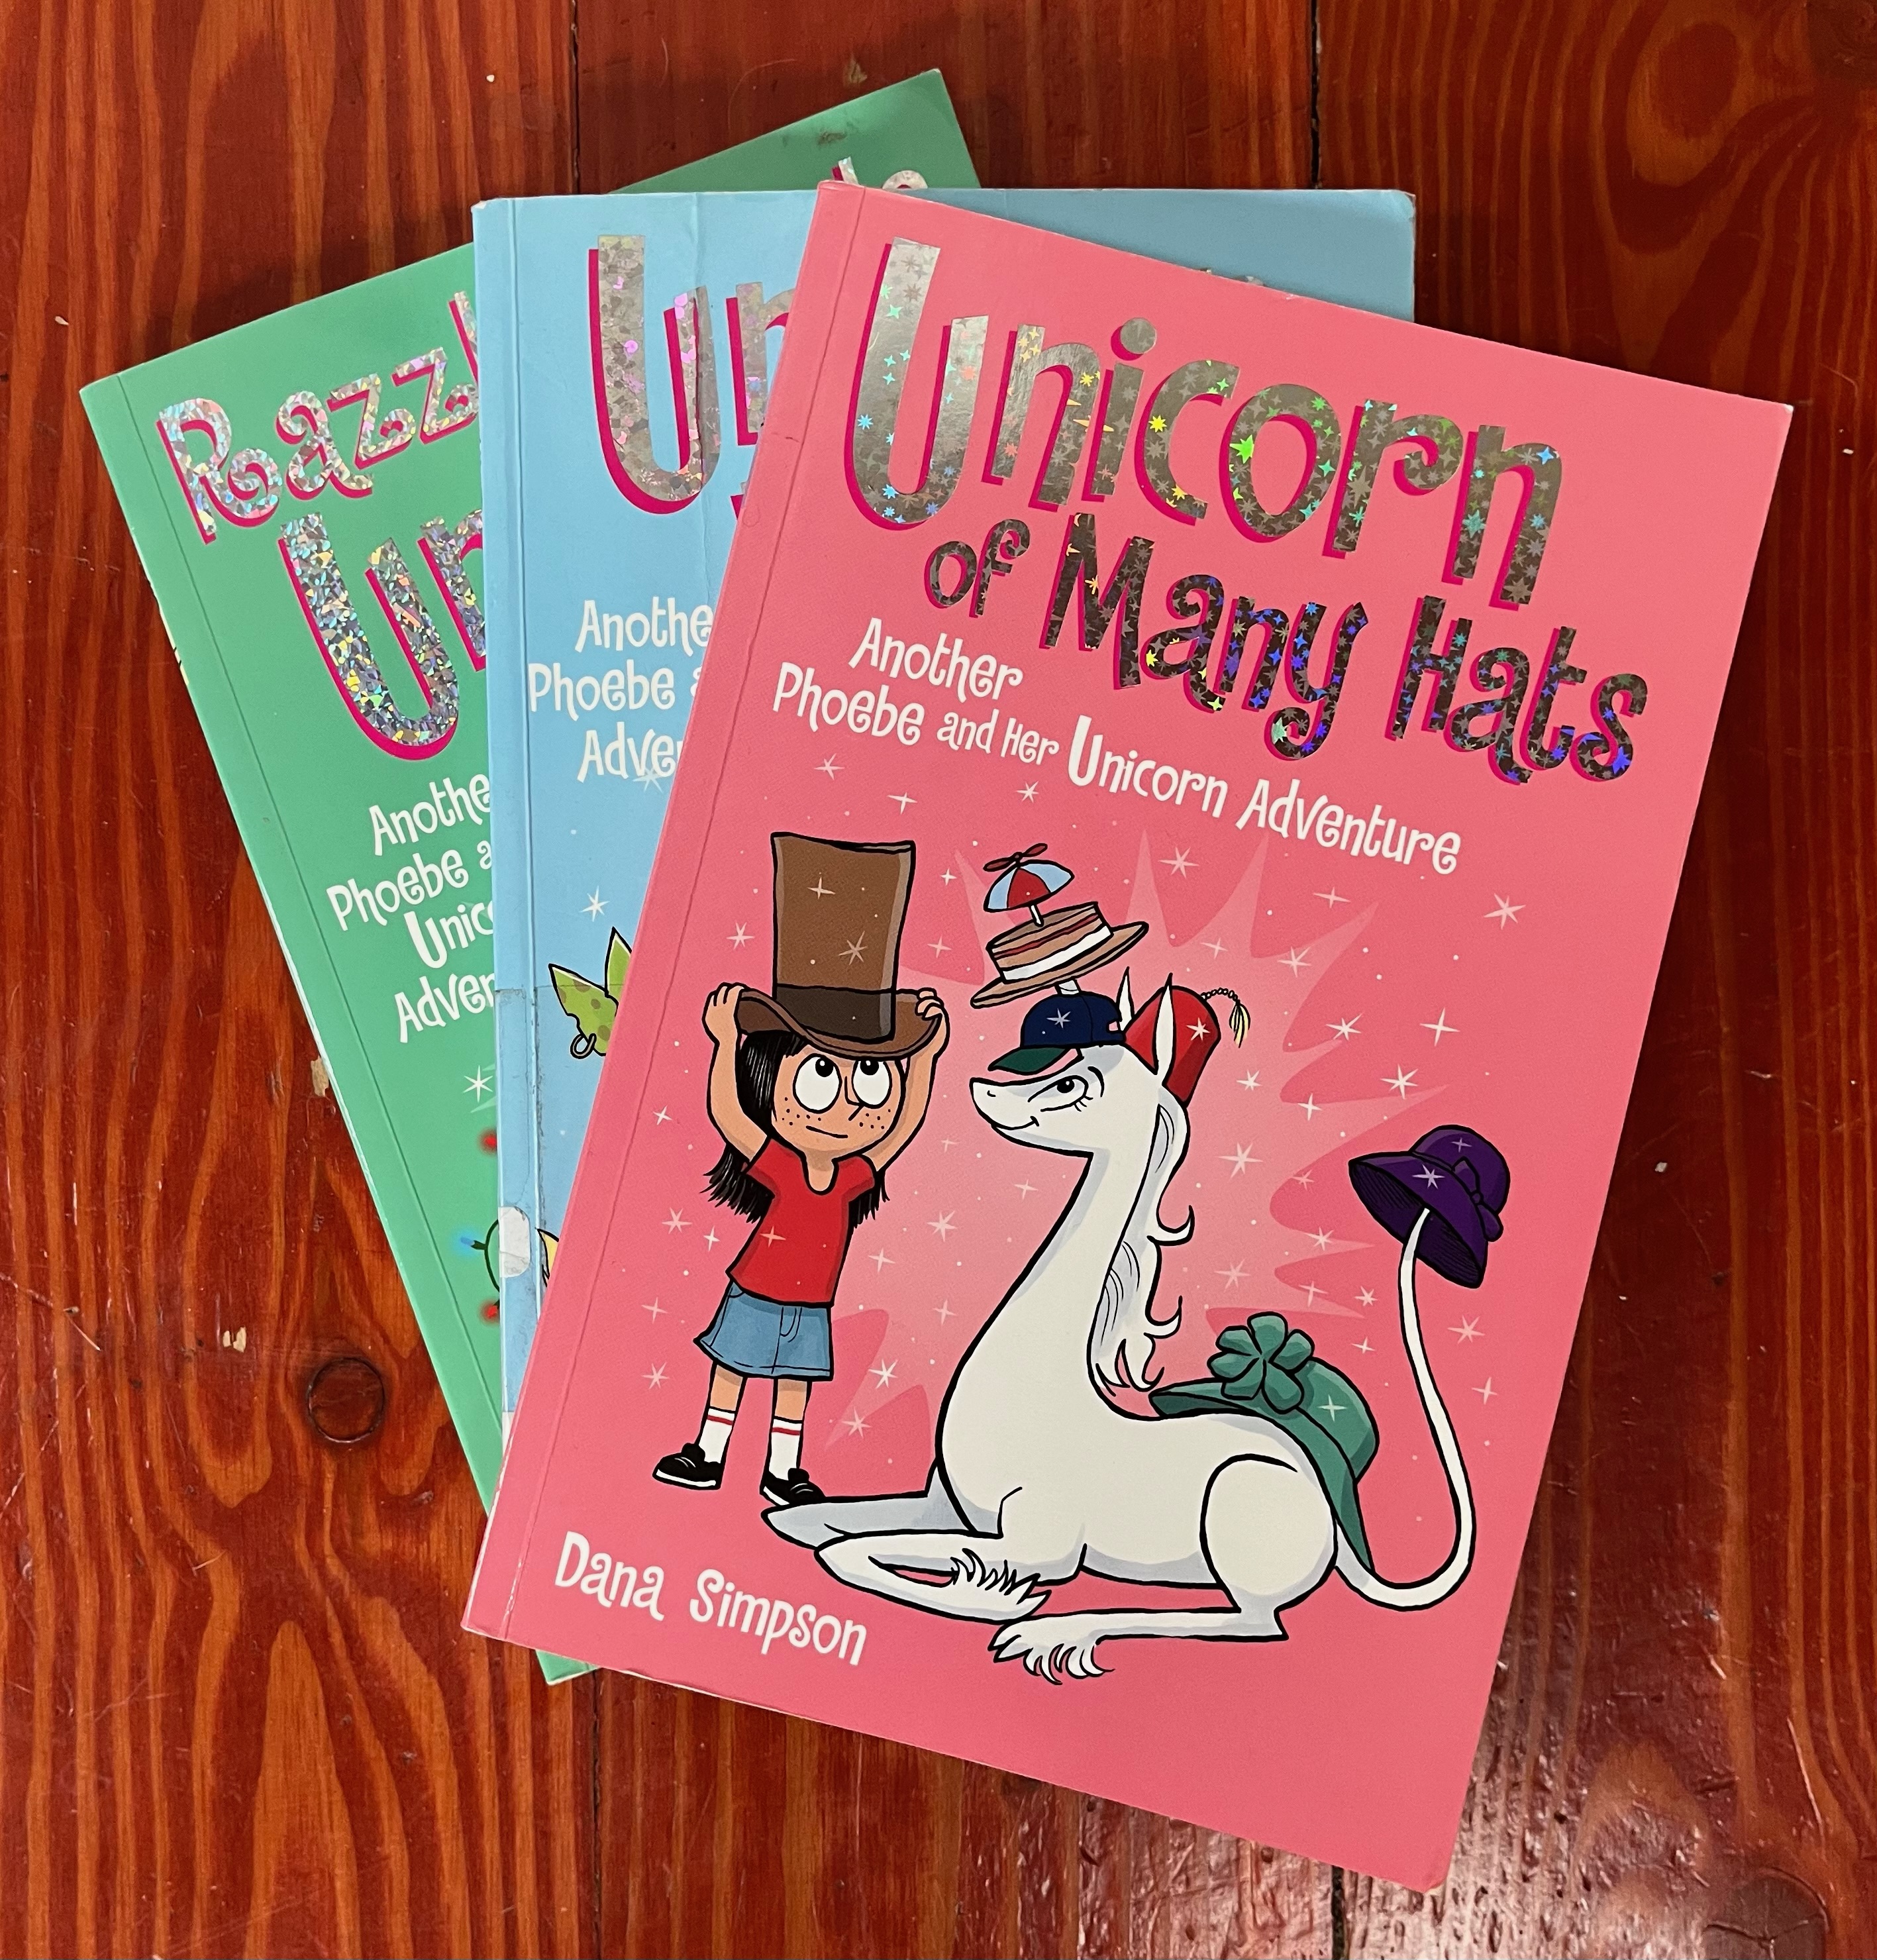 Books from the Phoebe and Her Unicorn graphic novel collection by Dana Simpson